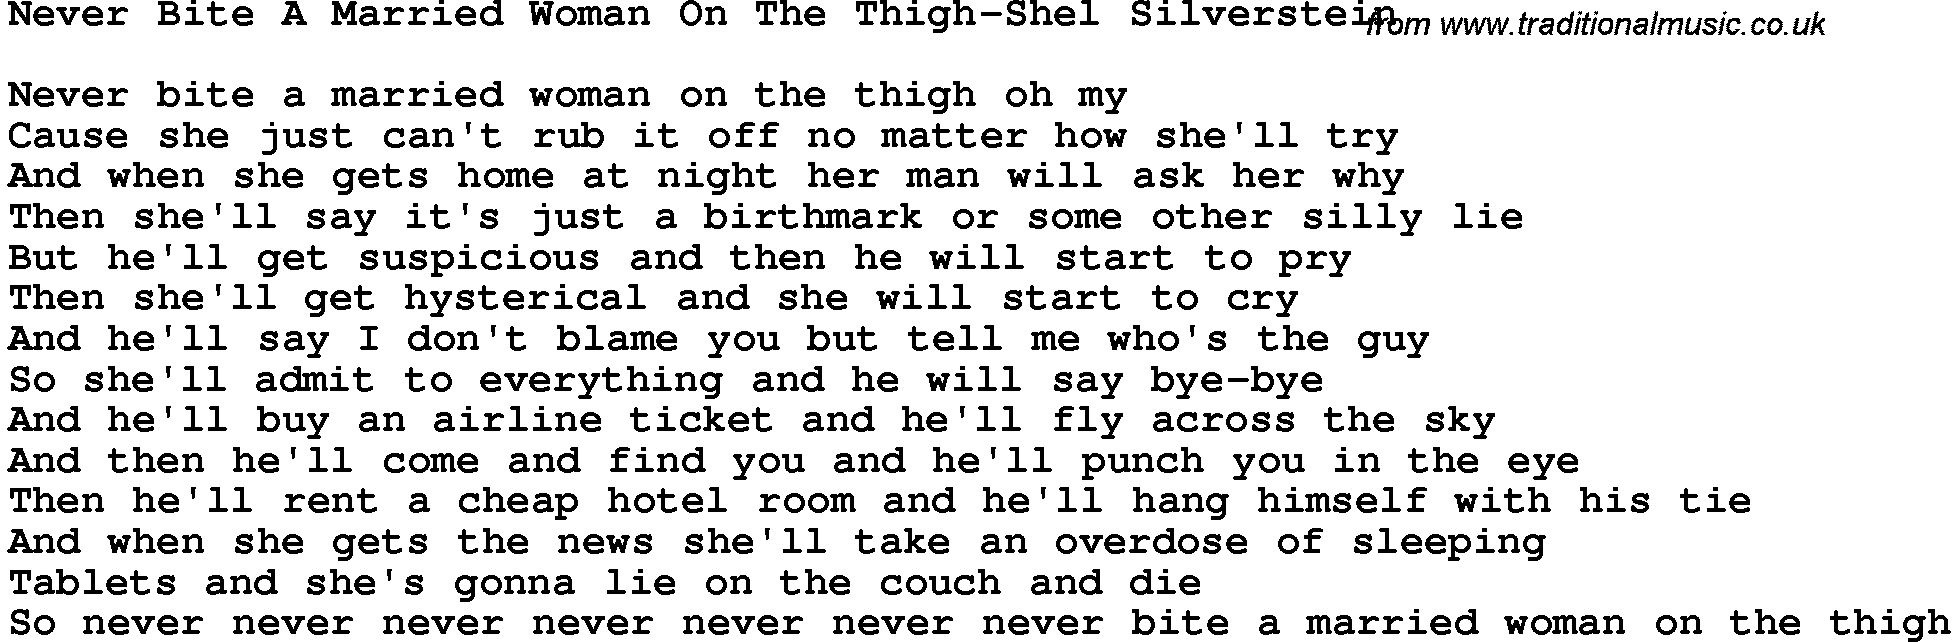 Novelty song: Never Bite A Married Woman On The Thigh-Shel Silverstein lyrics